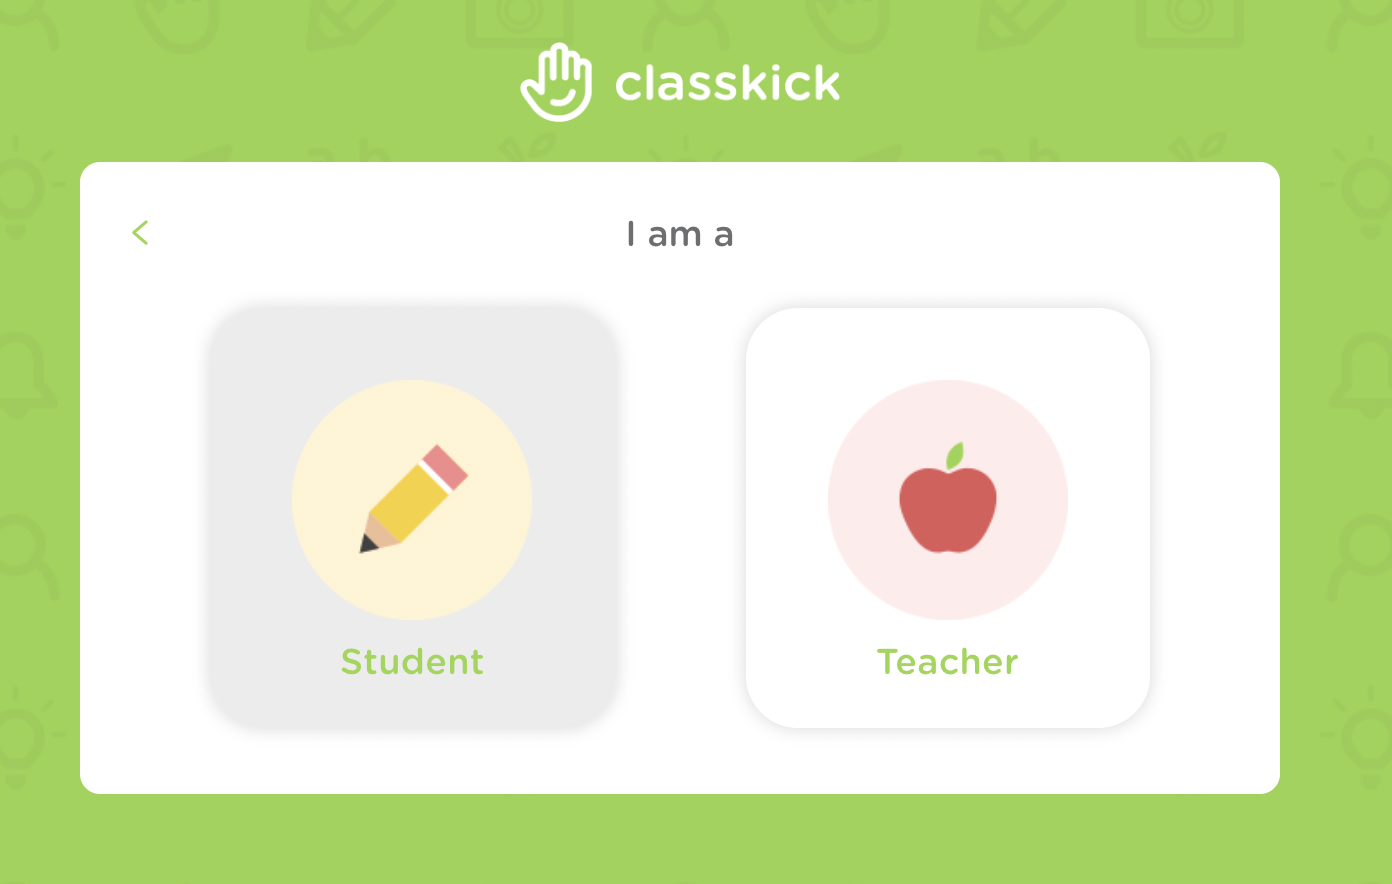 box with user selections. choices shown are student and teacher. student has been selected.